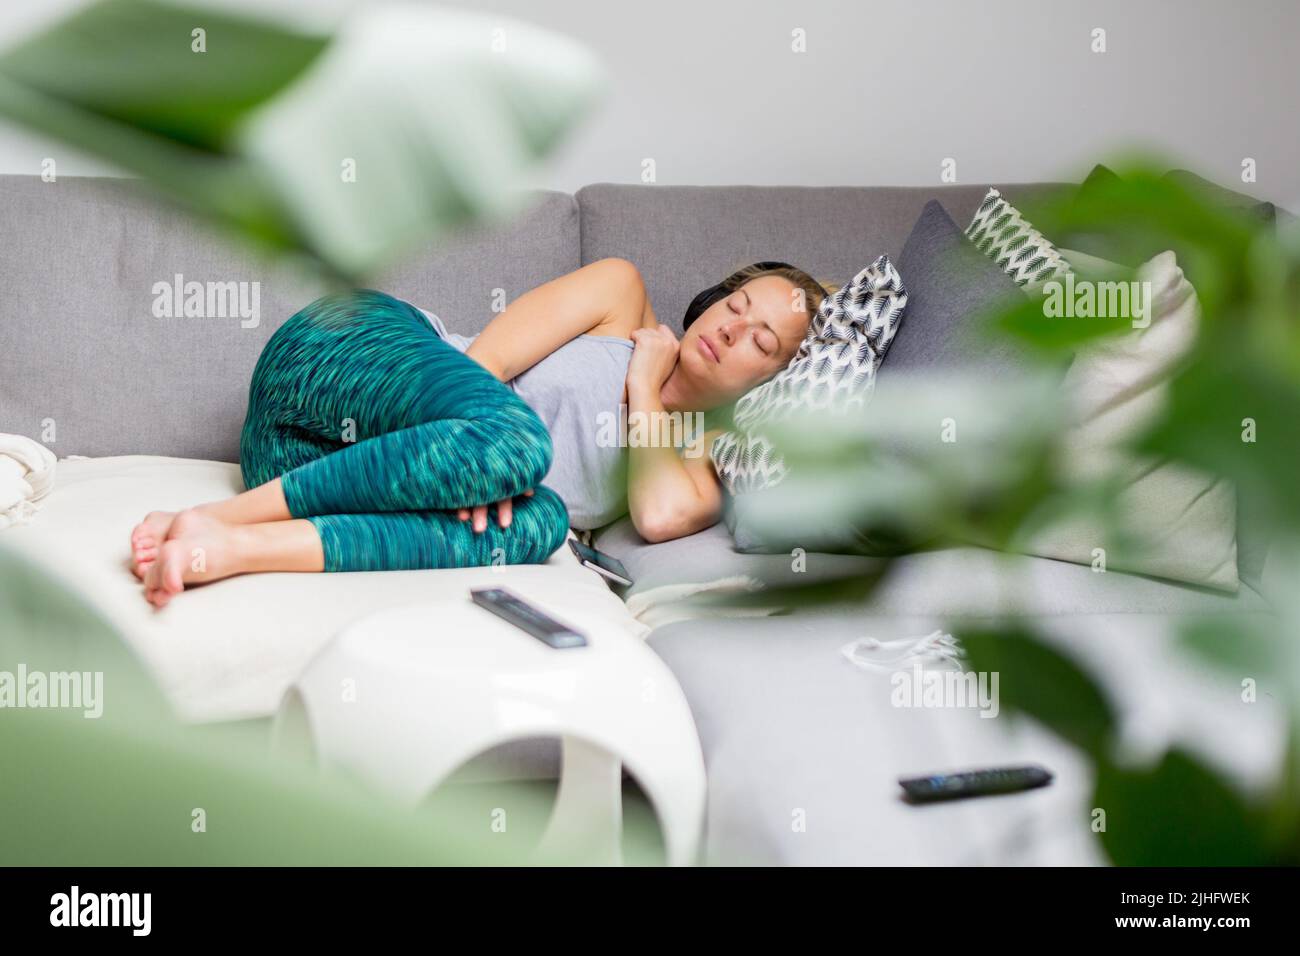 Young casual woman lying on couch cushion with eyes closed, relaxing on cozy sofa pillow, relaxed girl taking nap at home, wearing headphones Stock Photo